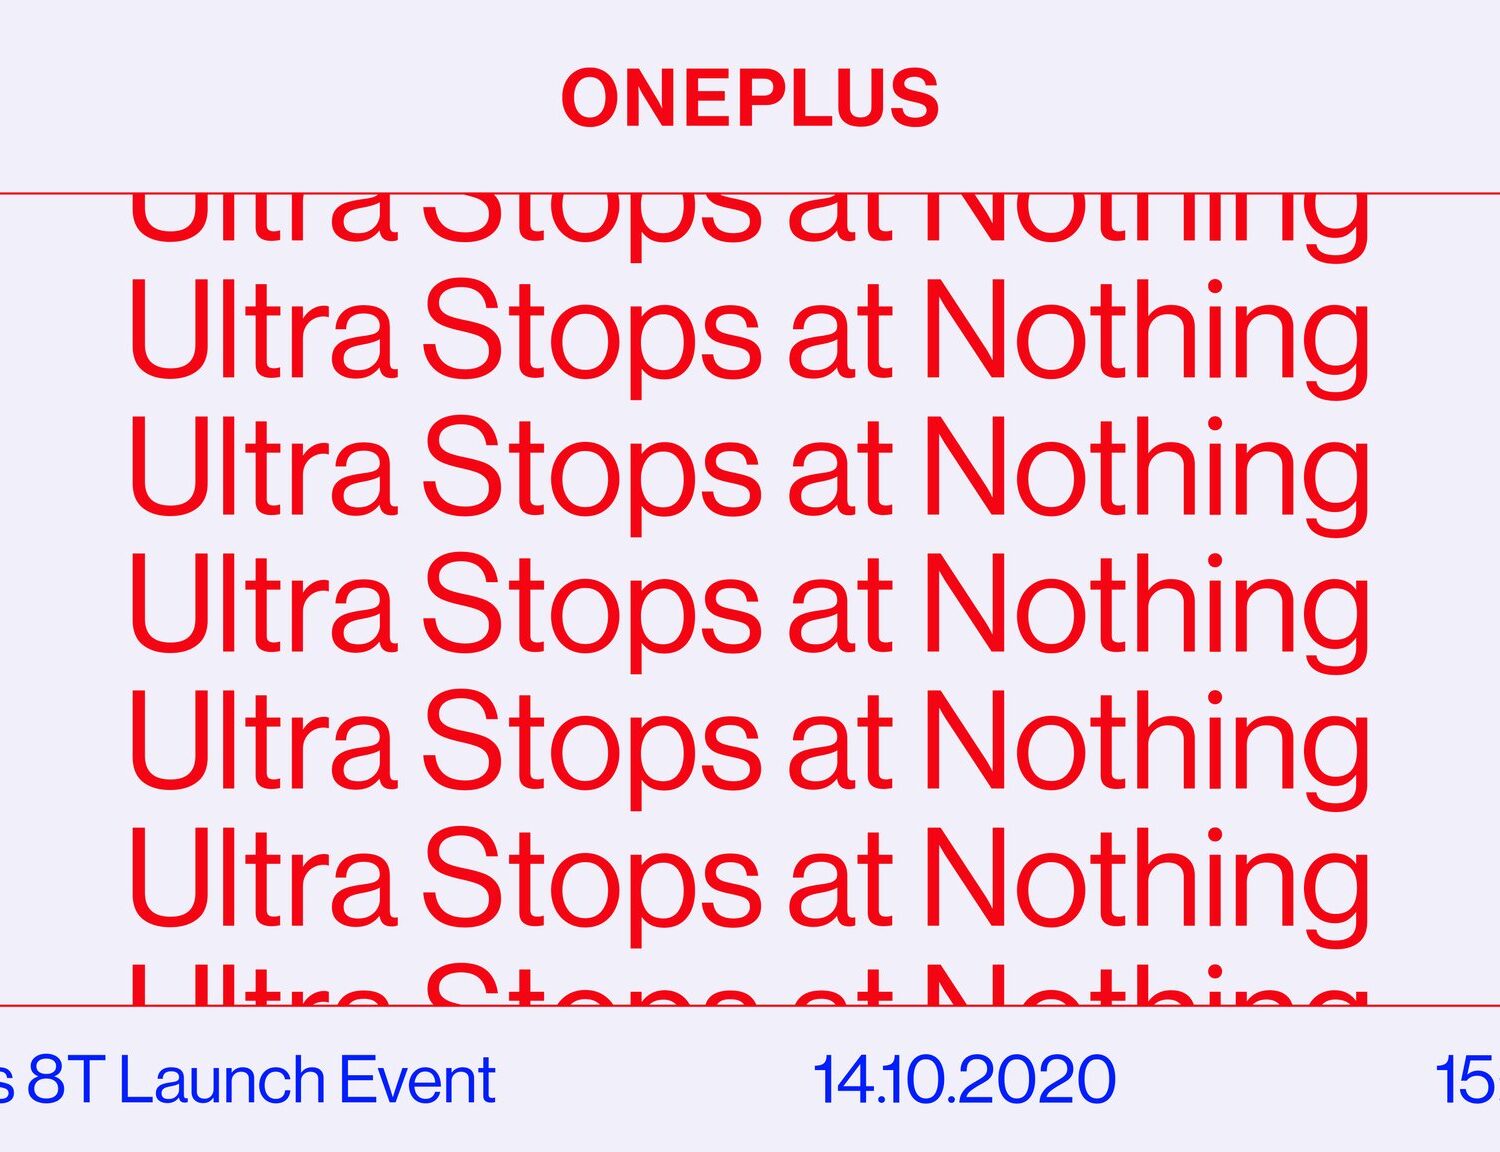 OnePlus 8T launching officially on October 14th